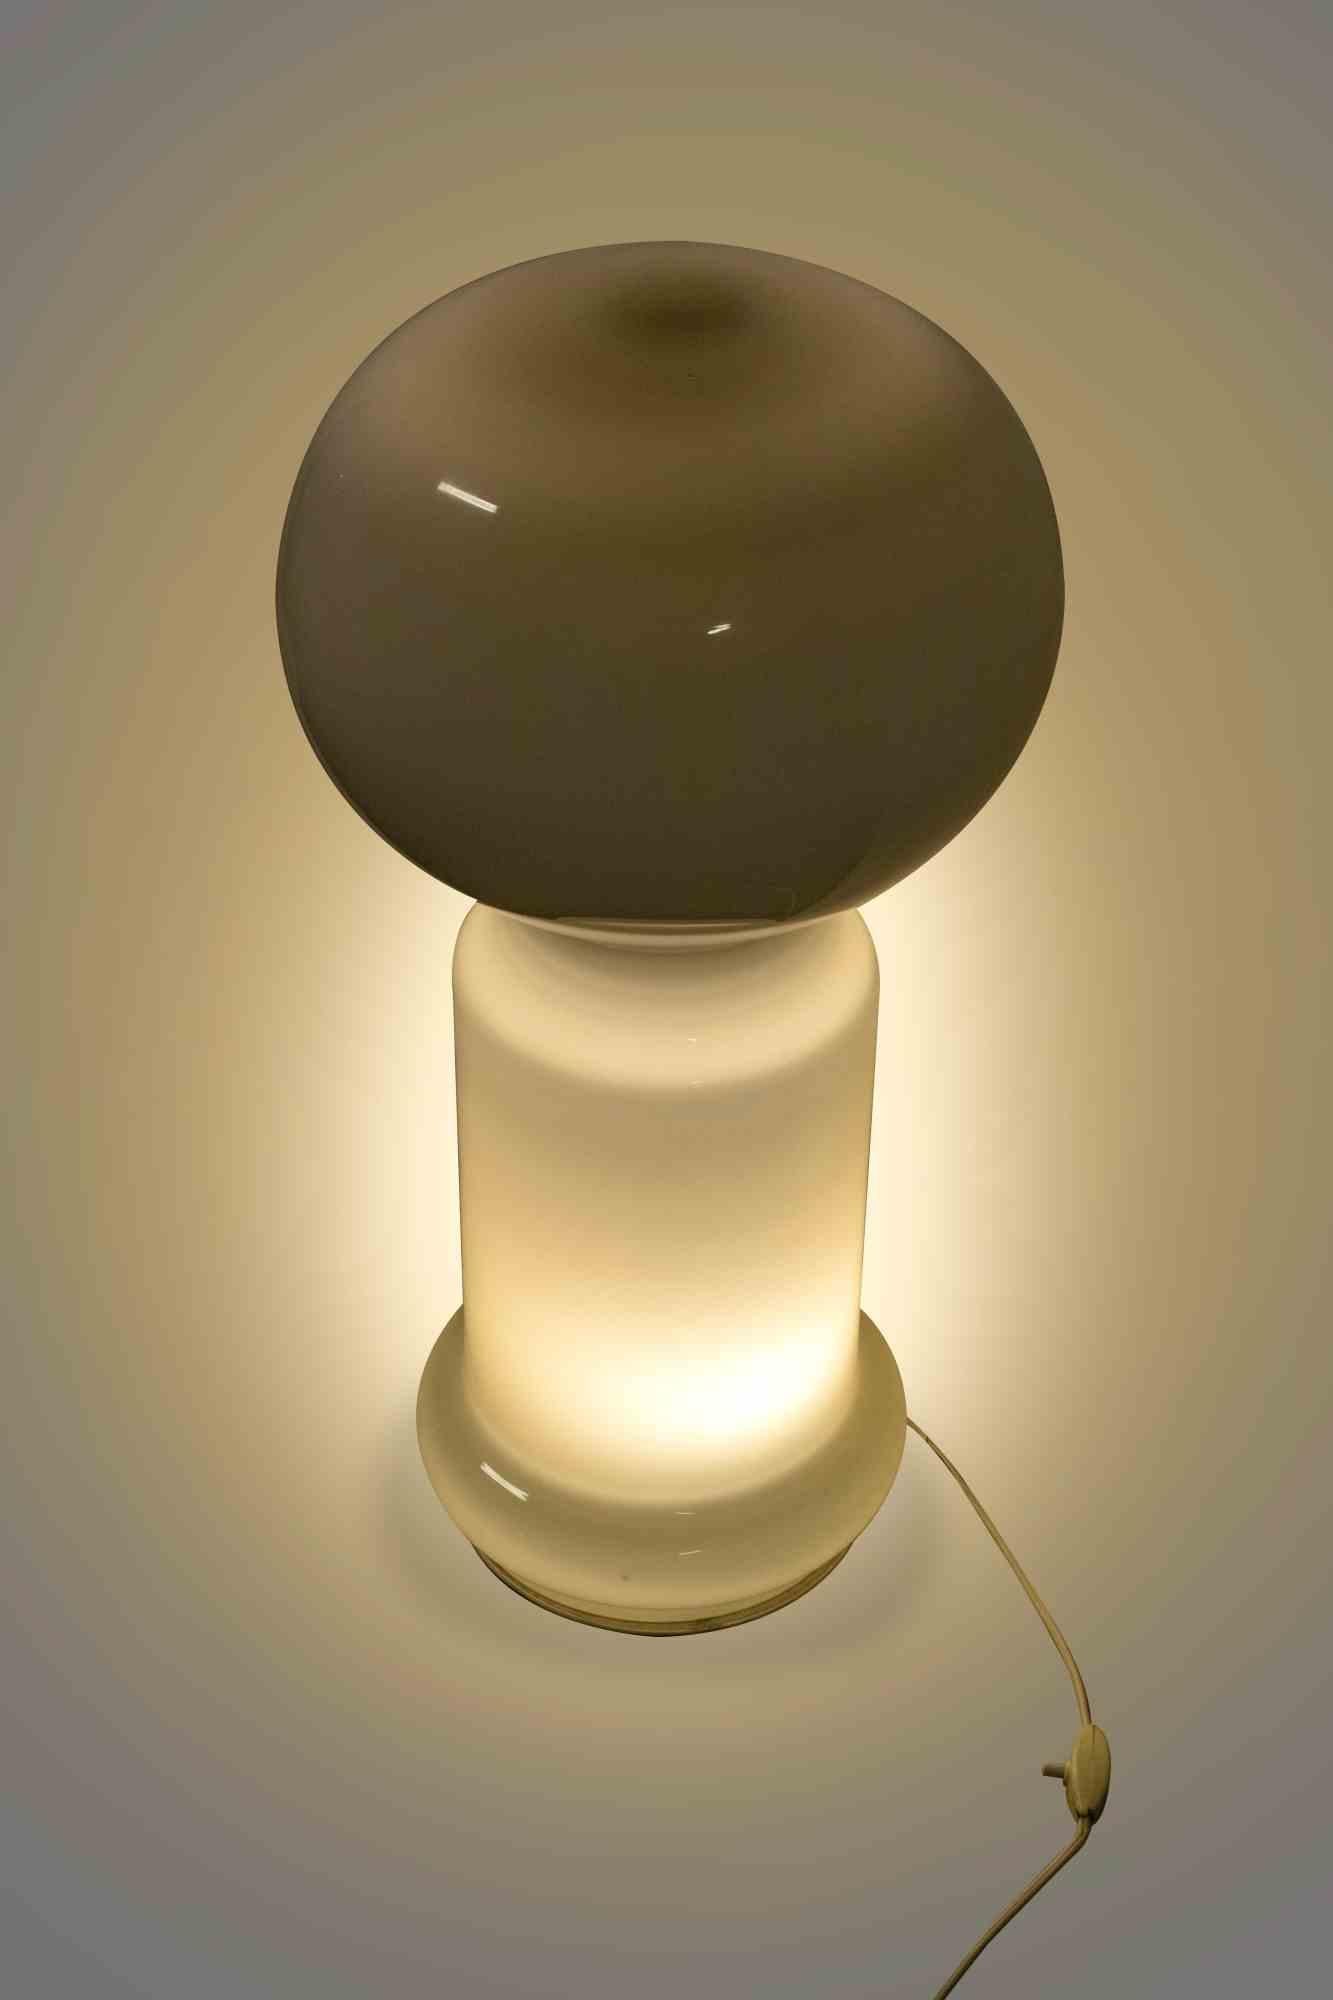 Vintage Murano glass table lamp is an original design lamp realized in the half of 1960s by Carlo Nason.

A beautiful vintage lamp entirely in Murano glass.

Very Good condition.

Carlo Nason (1935 Murano), is a famous Italian glass artist,